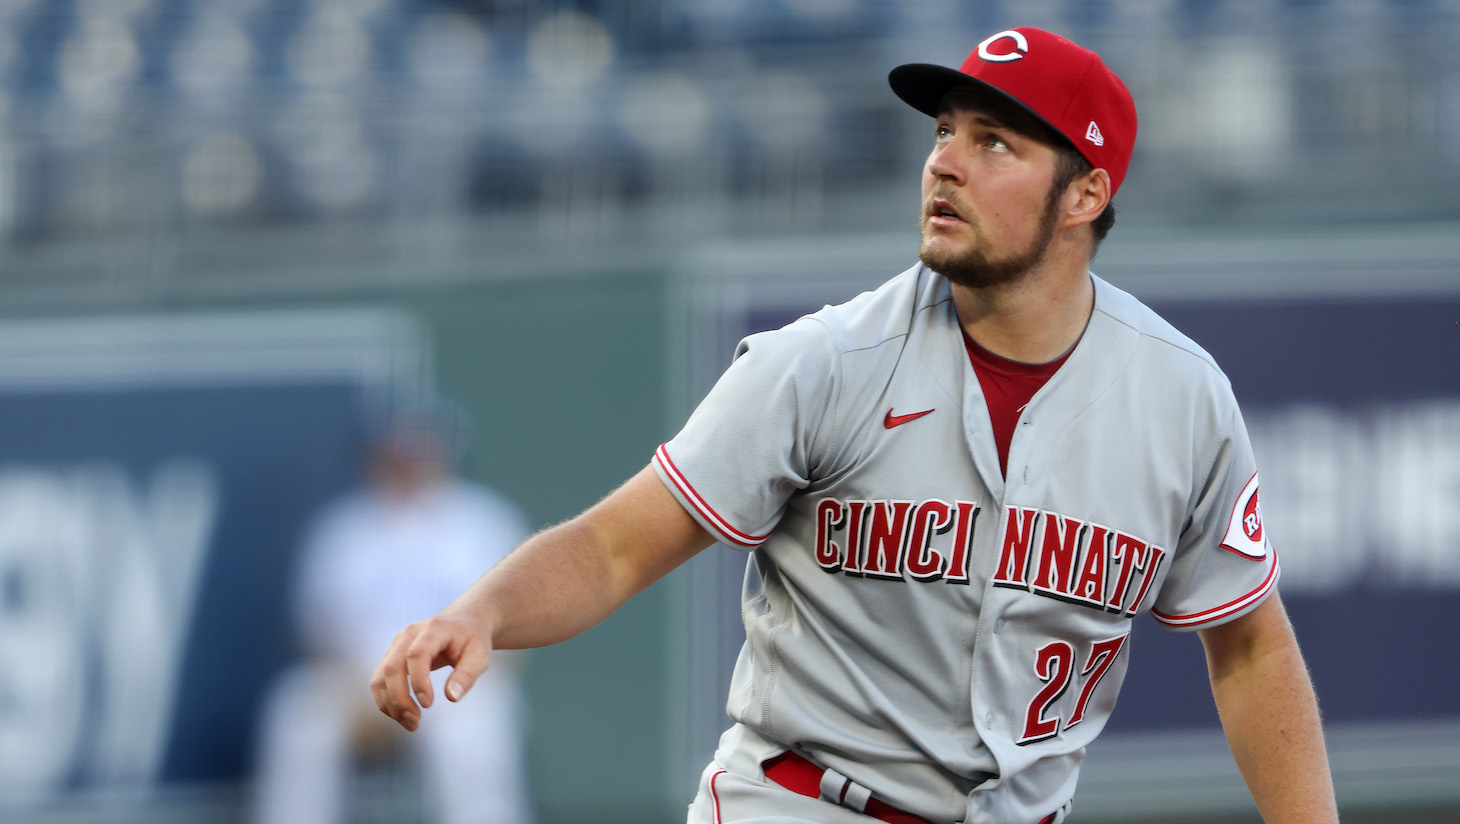 KANSAS CITY, MISSOURI - AUGUST 19: Starting pitcher Trevor Bauer #27 of the Cincinnati Reds pitches during the first inning of game two of a doubleheader against the Kansas City Royals at Kauffman Stadium on August 19, 2020 in Kansas City, Missouri. (Photo by Jamie Squire/Getty Images)